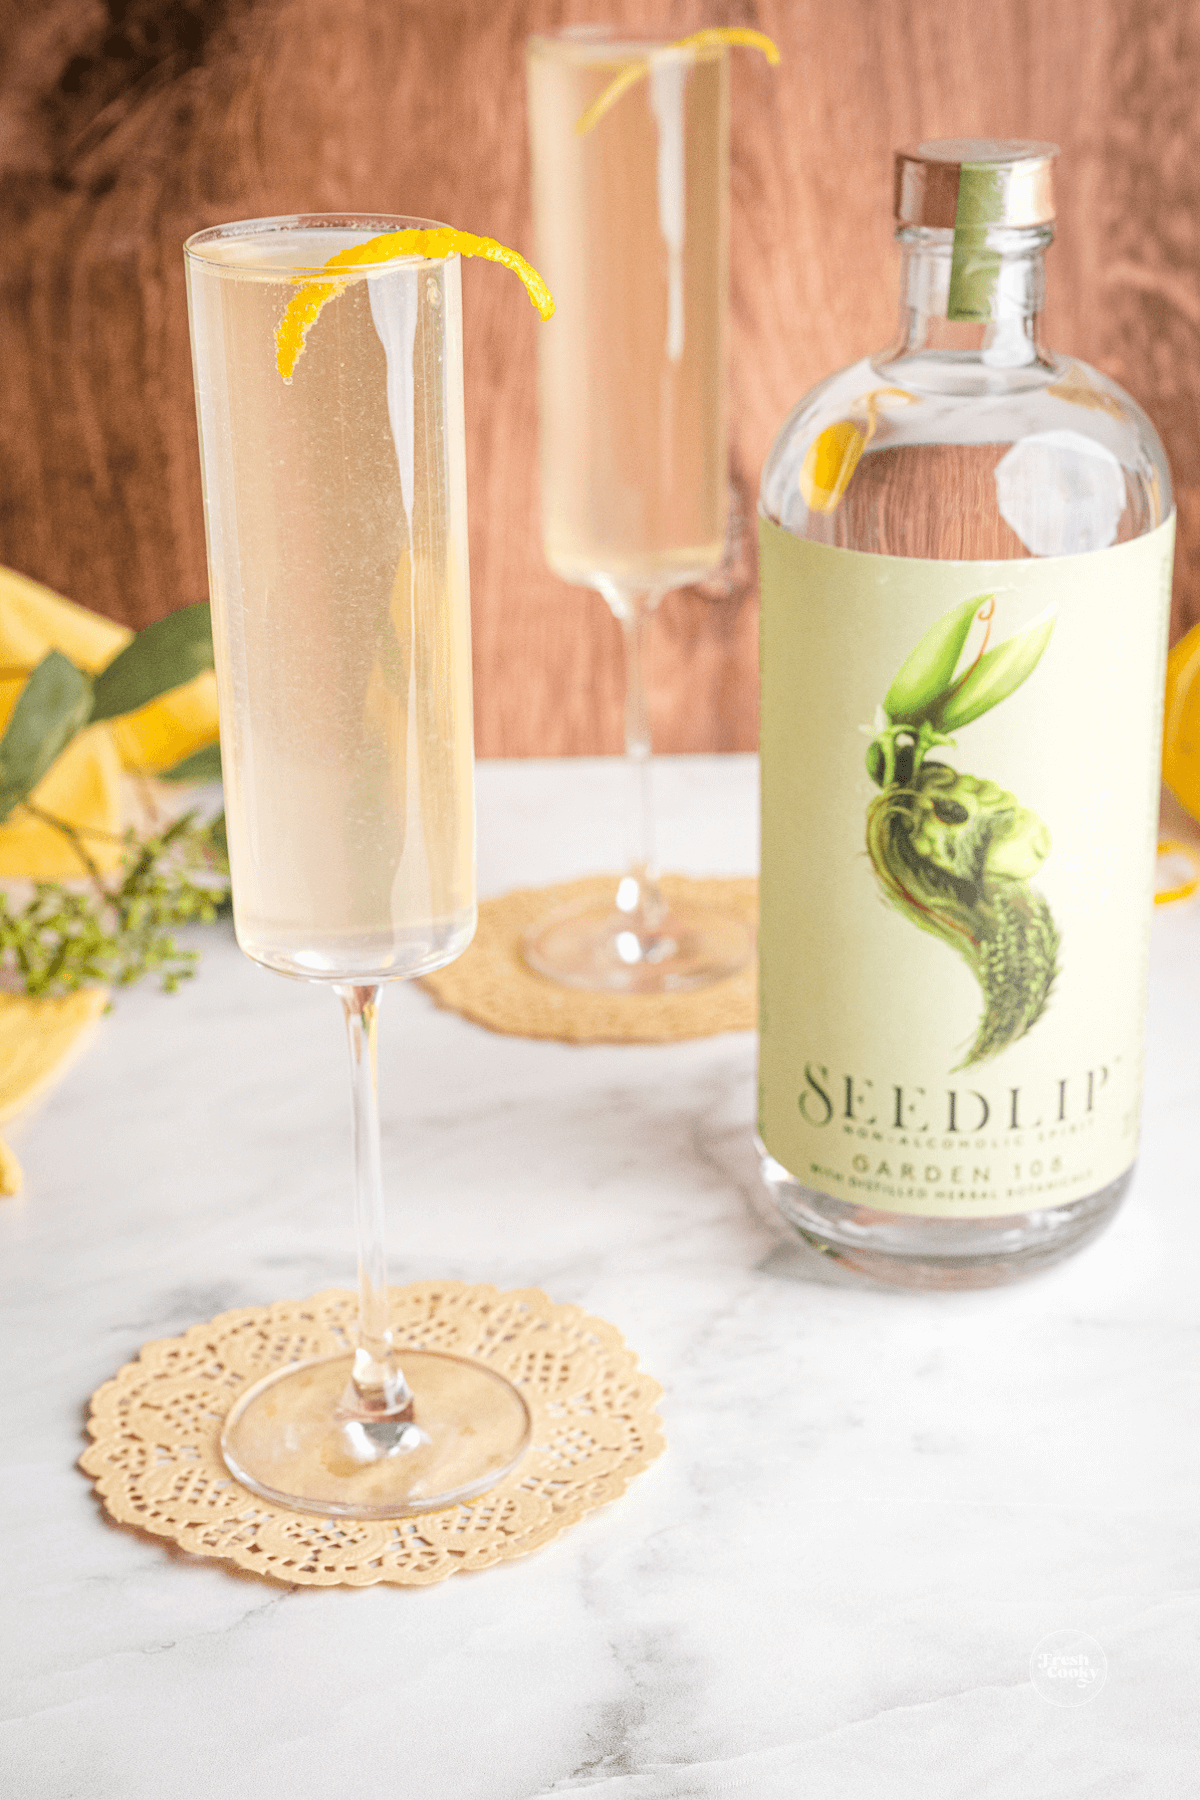 French 75 mocktail made with Seedlip non-alcoholic gin.